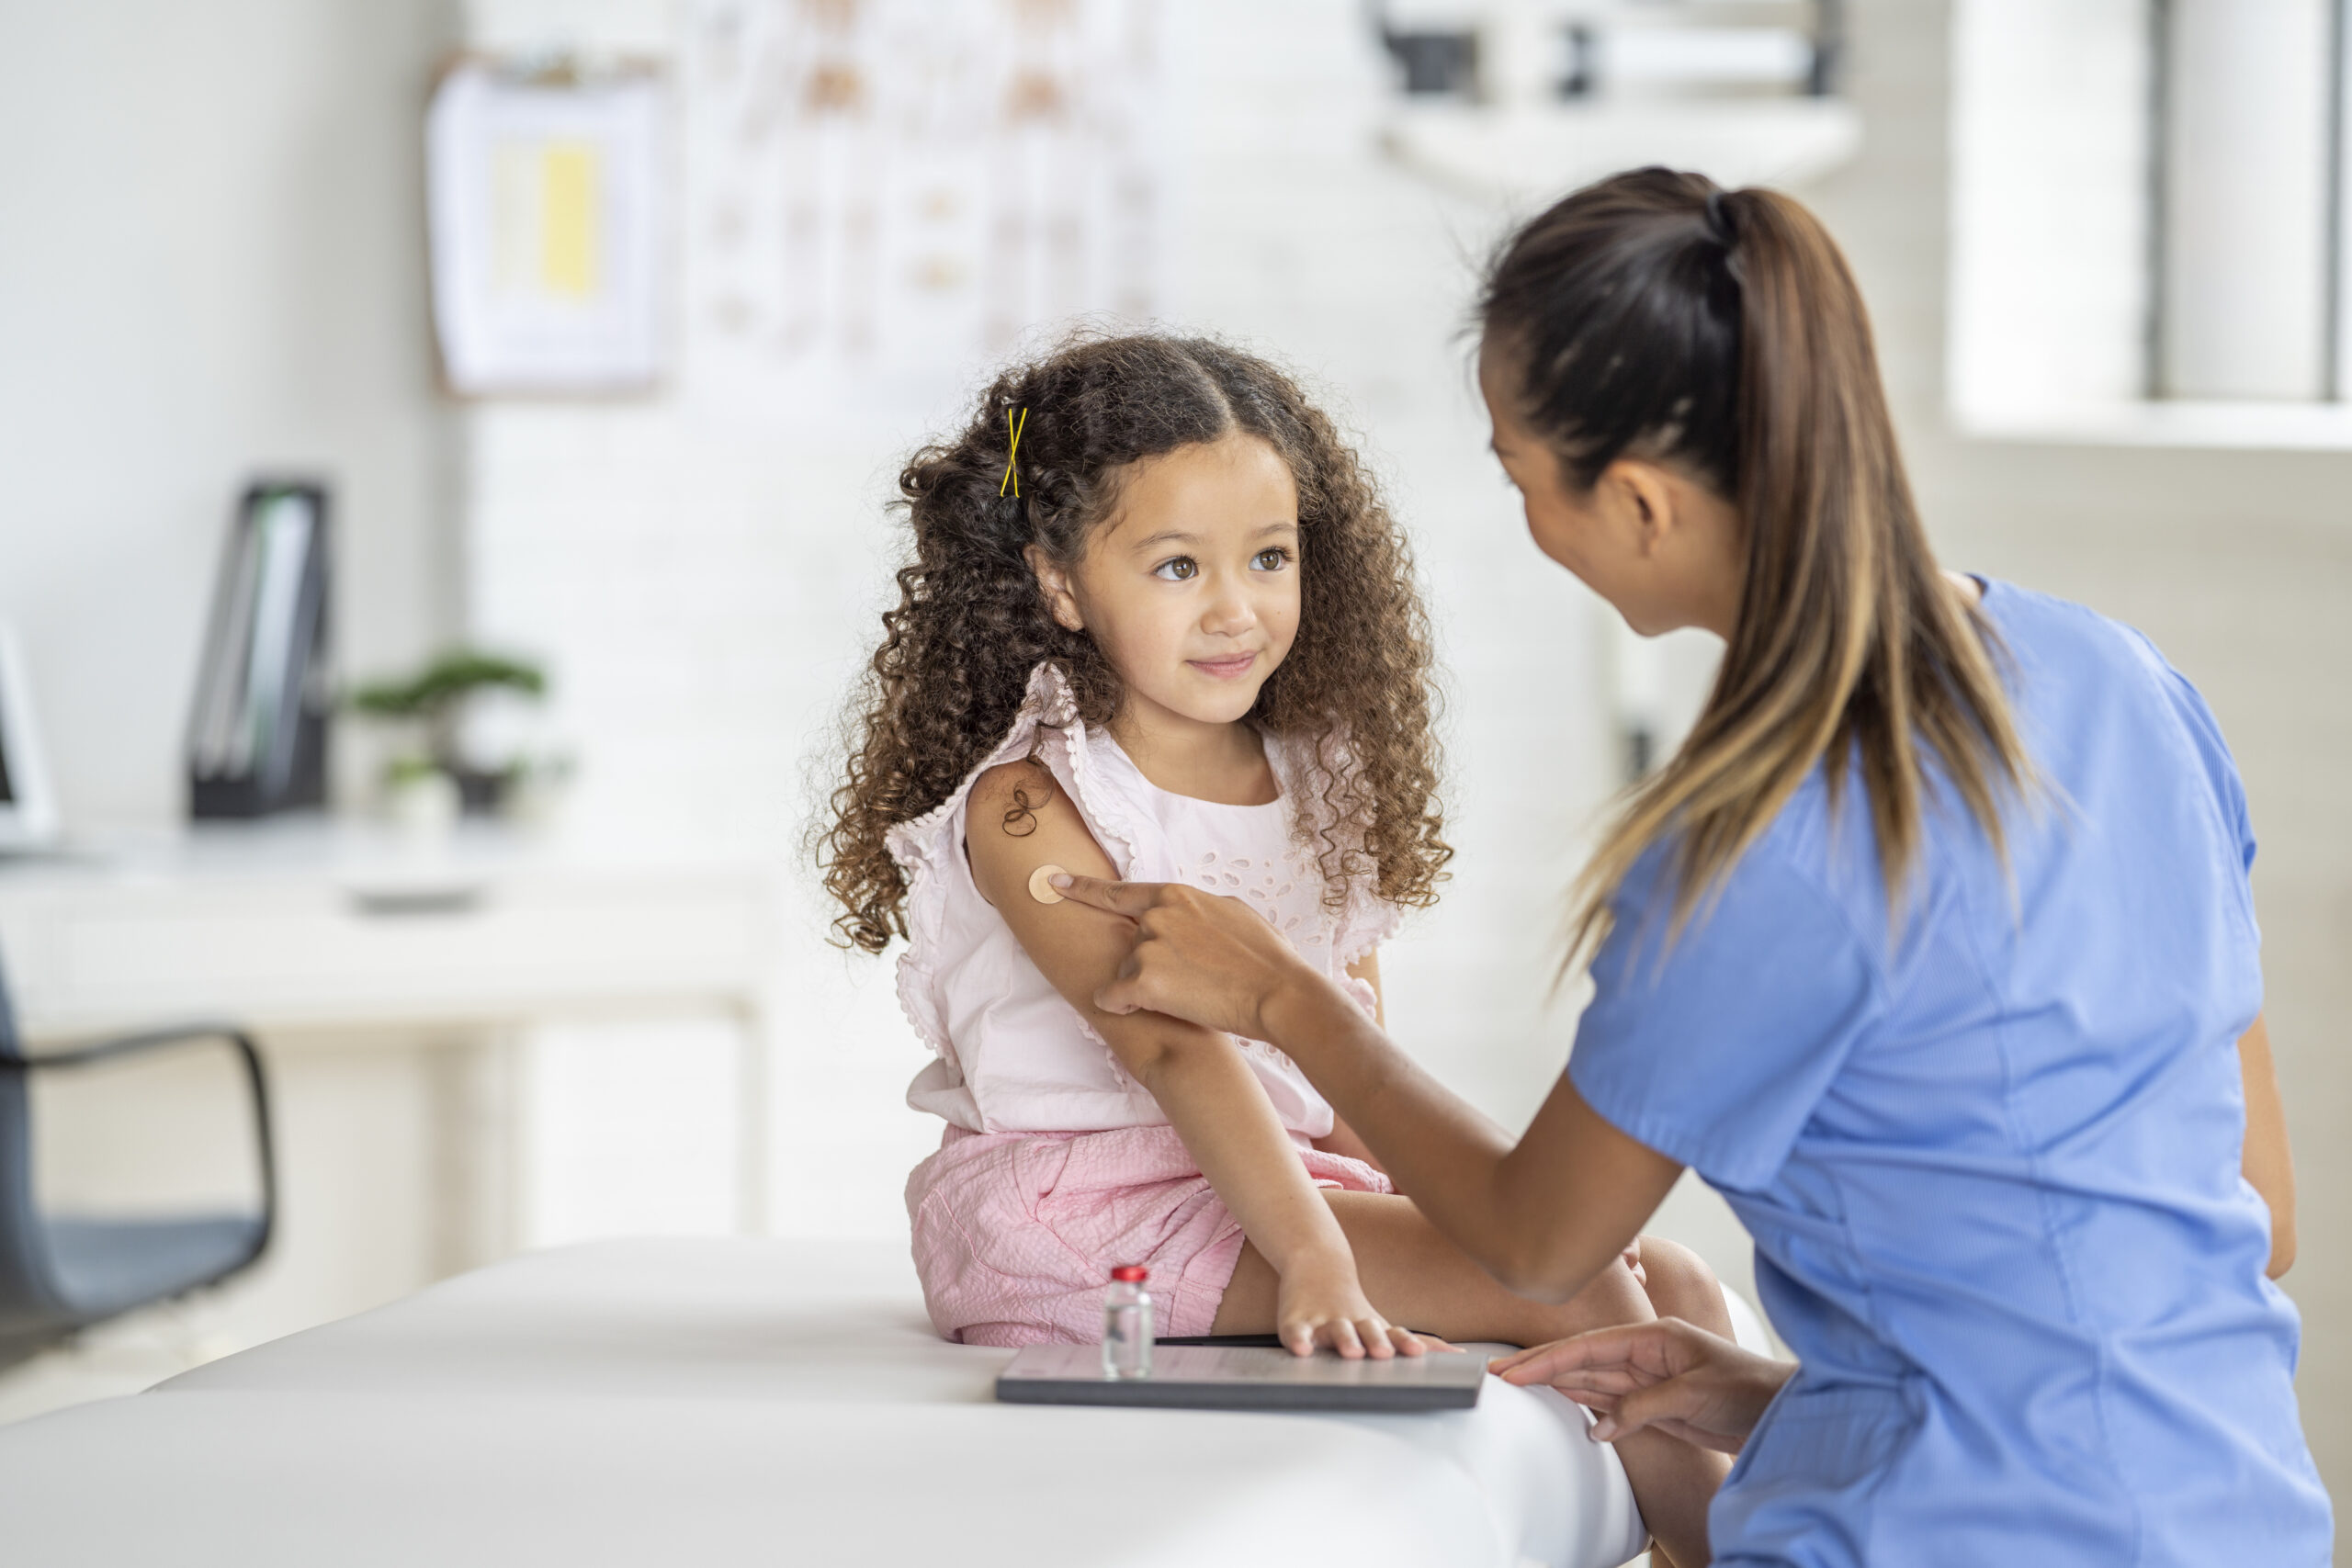 What to Consider When Ranking Pediatric Residency Programs